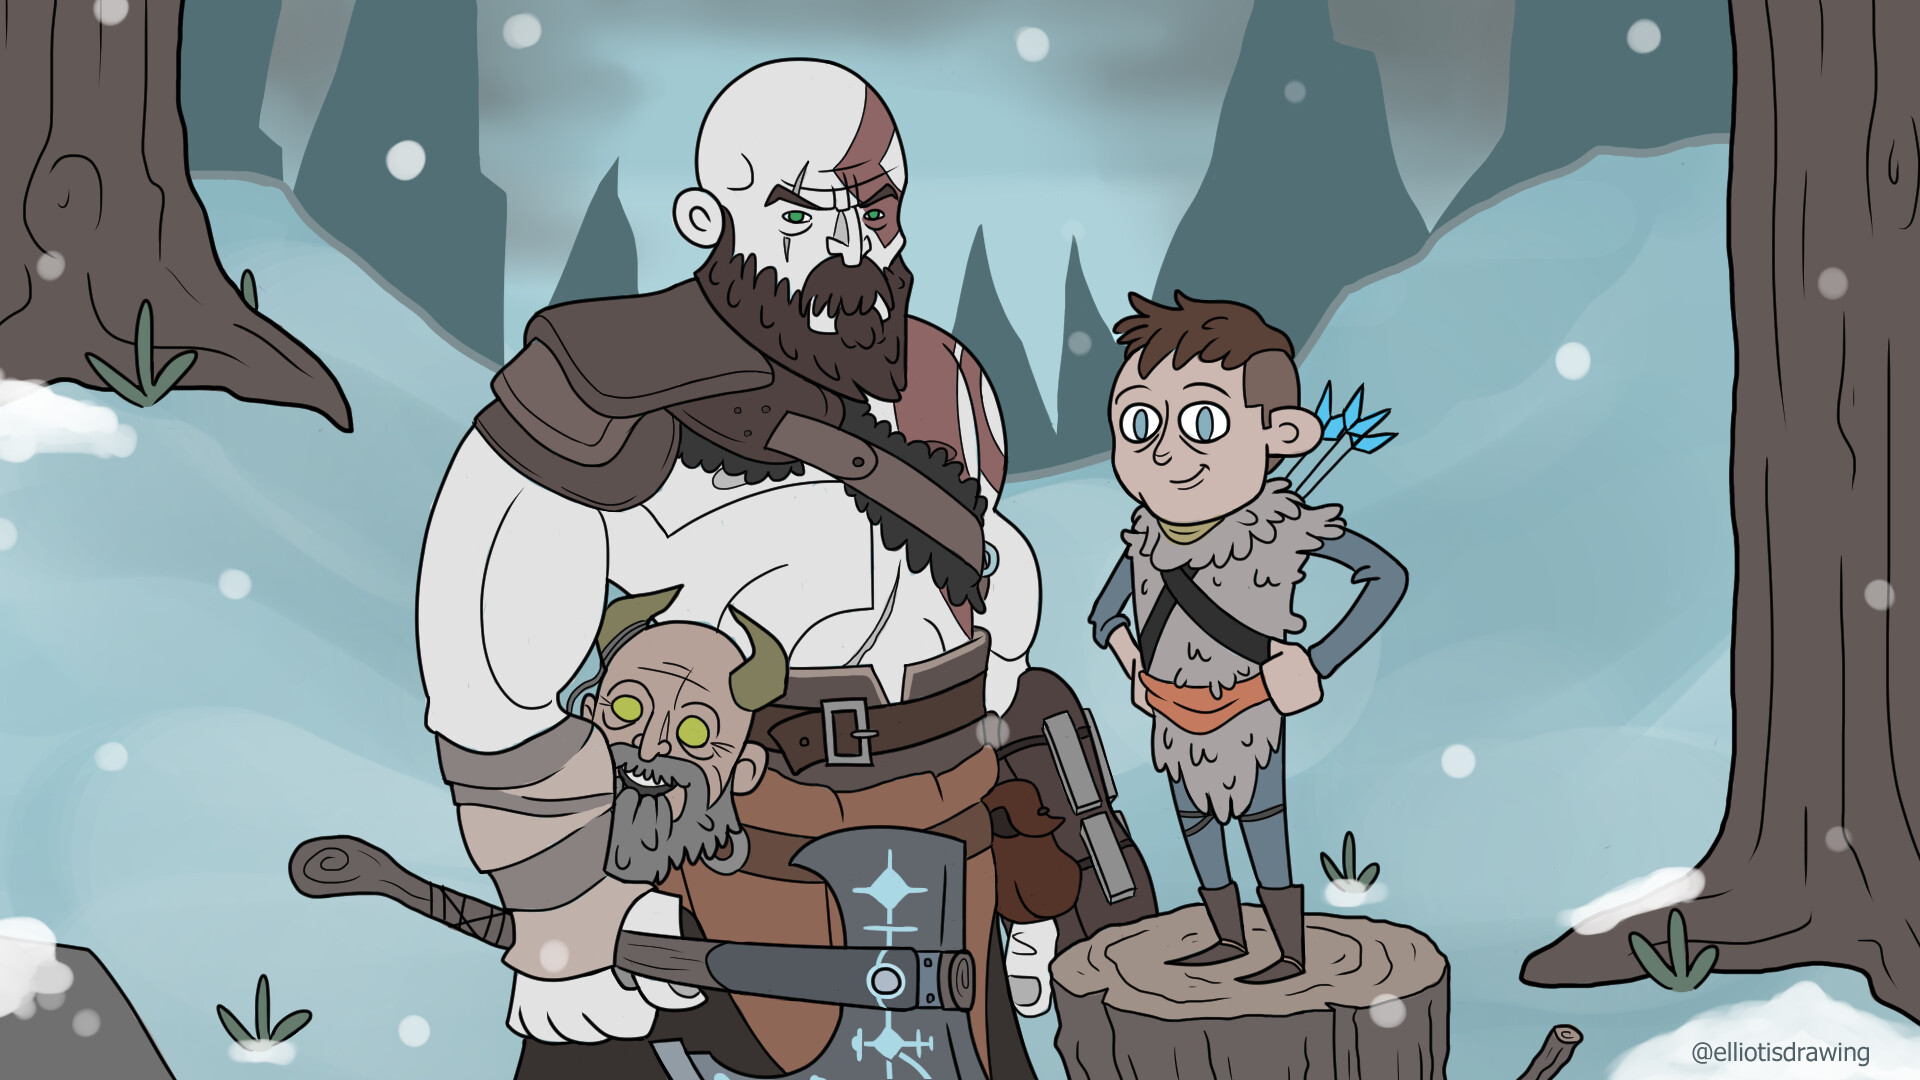 And not only that, the story of Kratos and Atreus has inspired me a lot and...